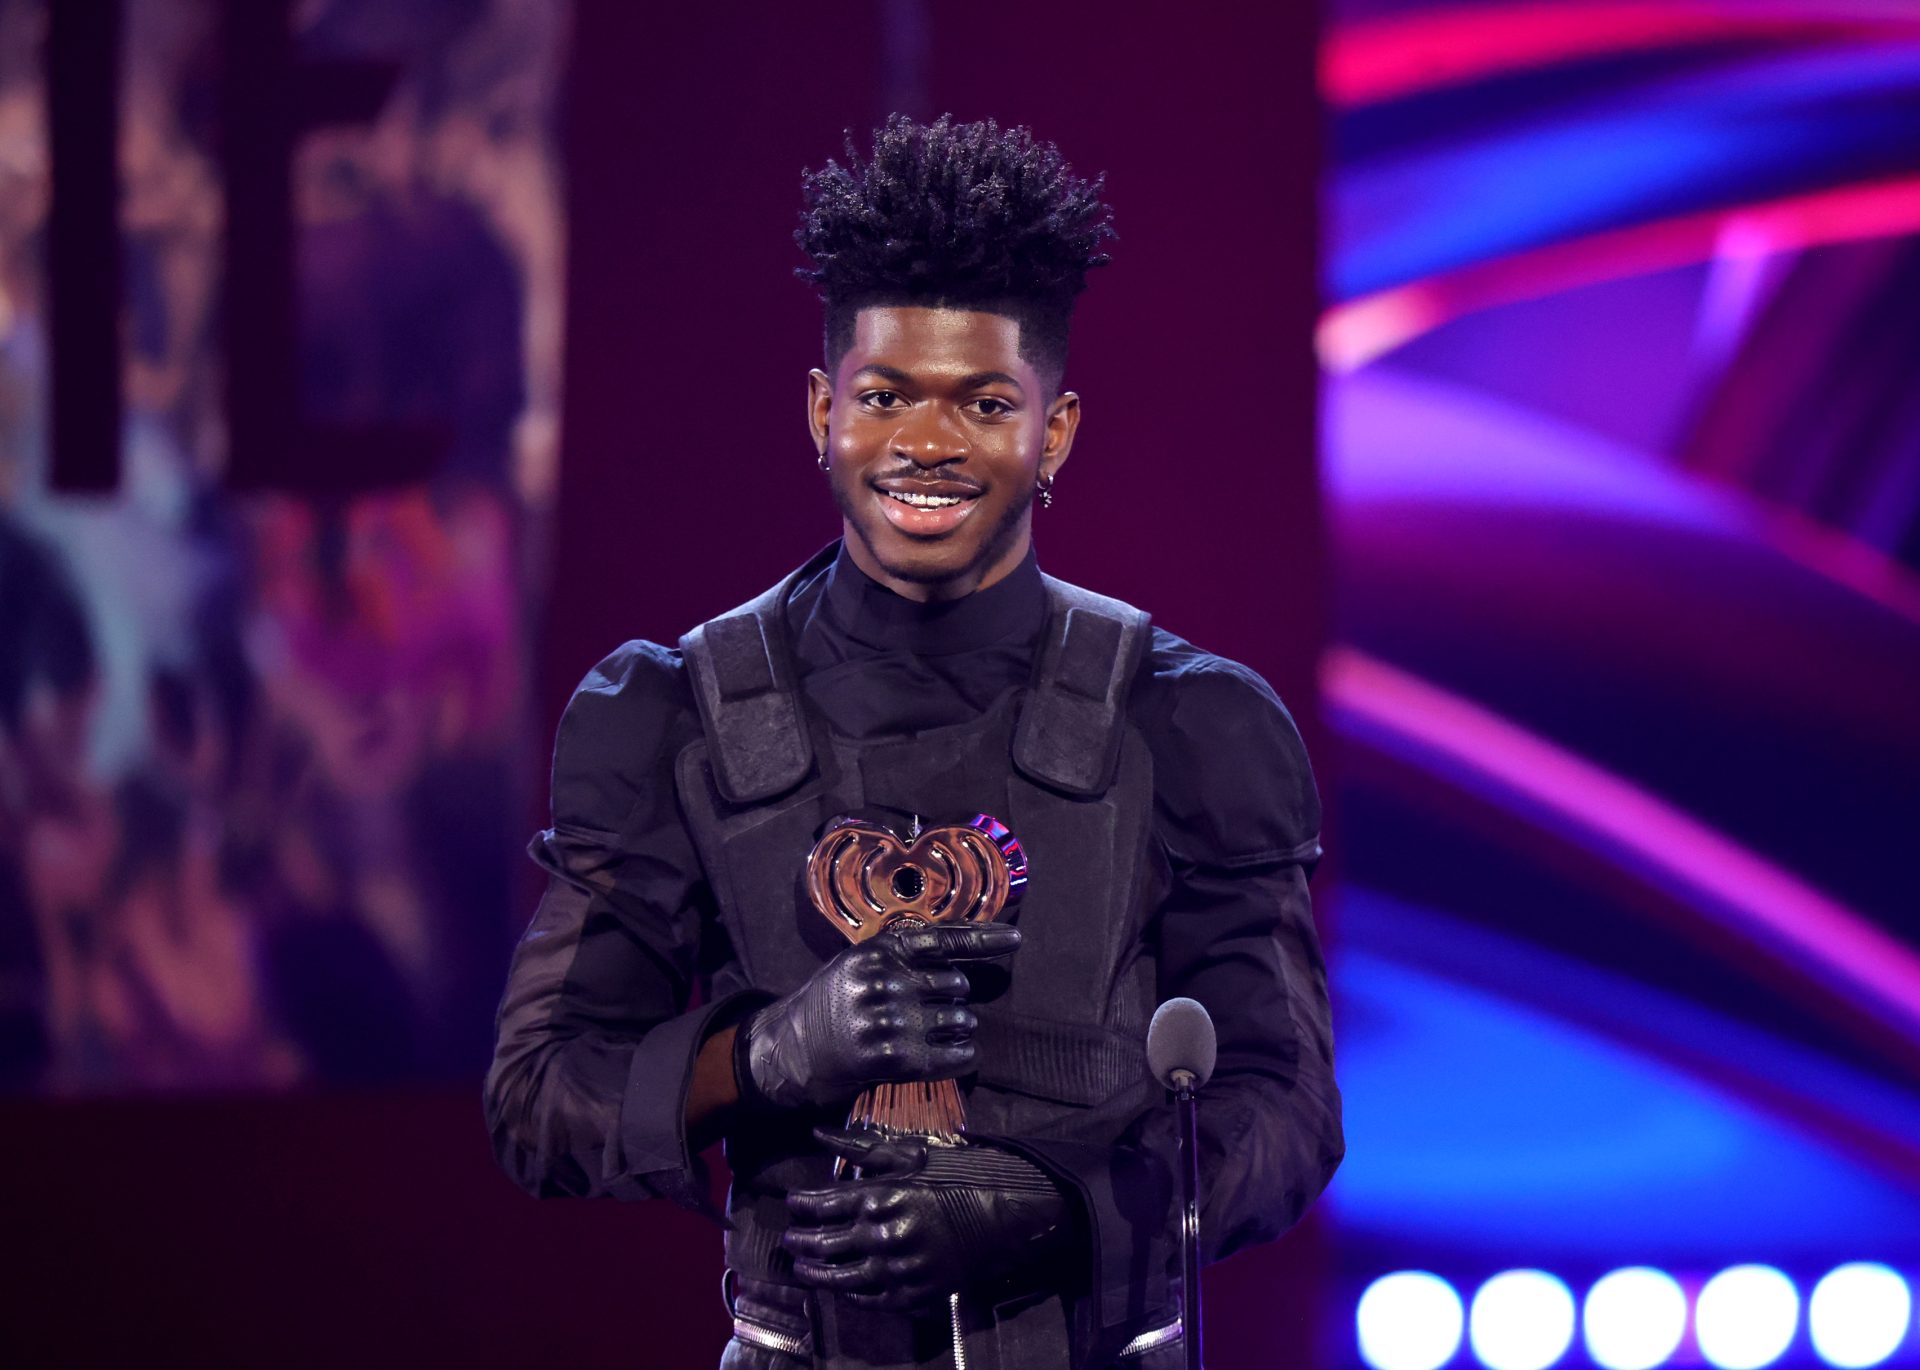 Lil Nas X Says “Be Delusional” While Dream Chasing In iHeartRadio Award Acceptance Speech